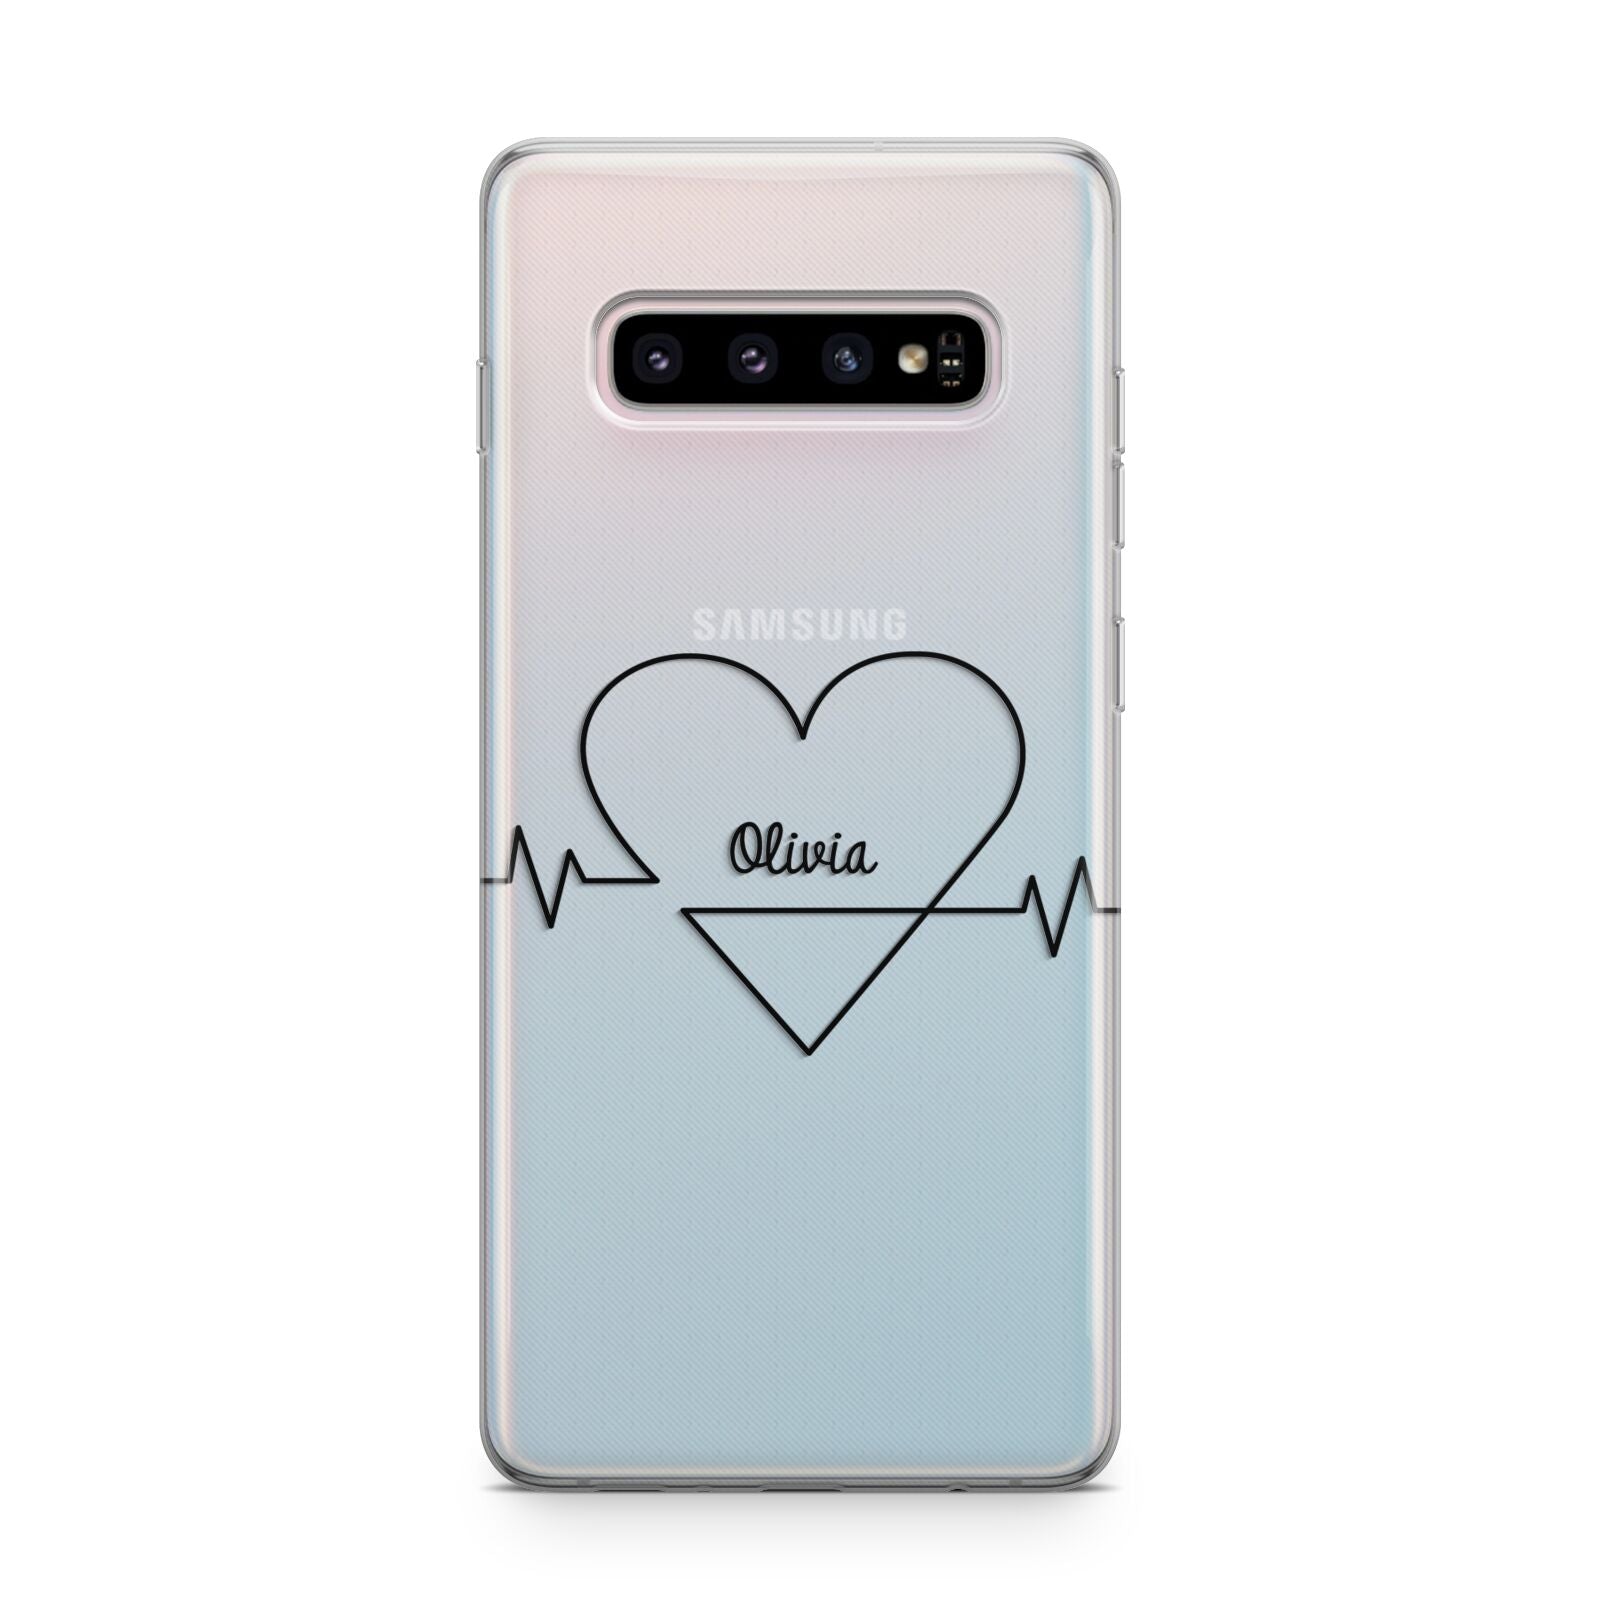 ECG Effect Heart Beats with Name Samsung Galaxy S10 Plus Case